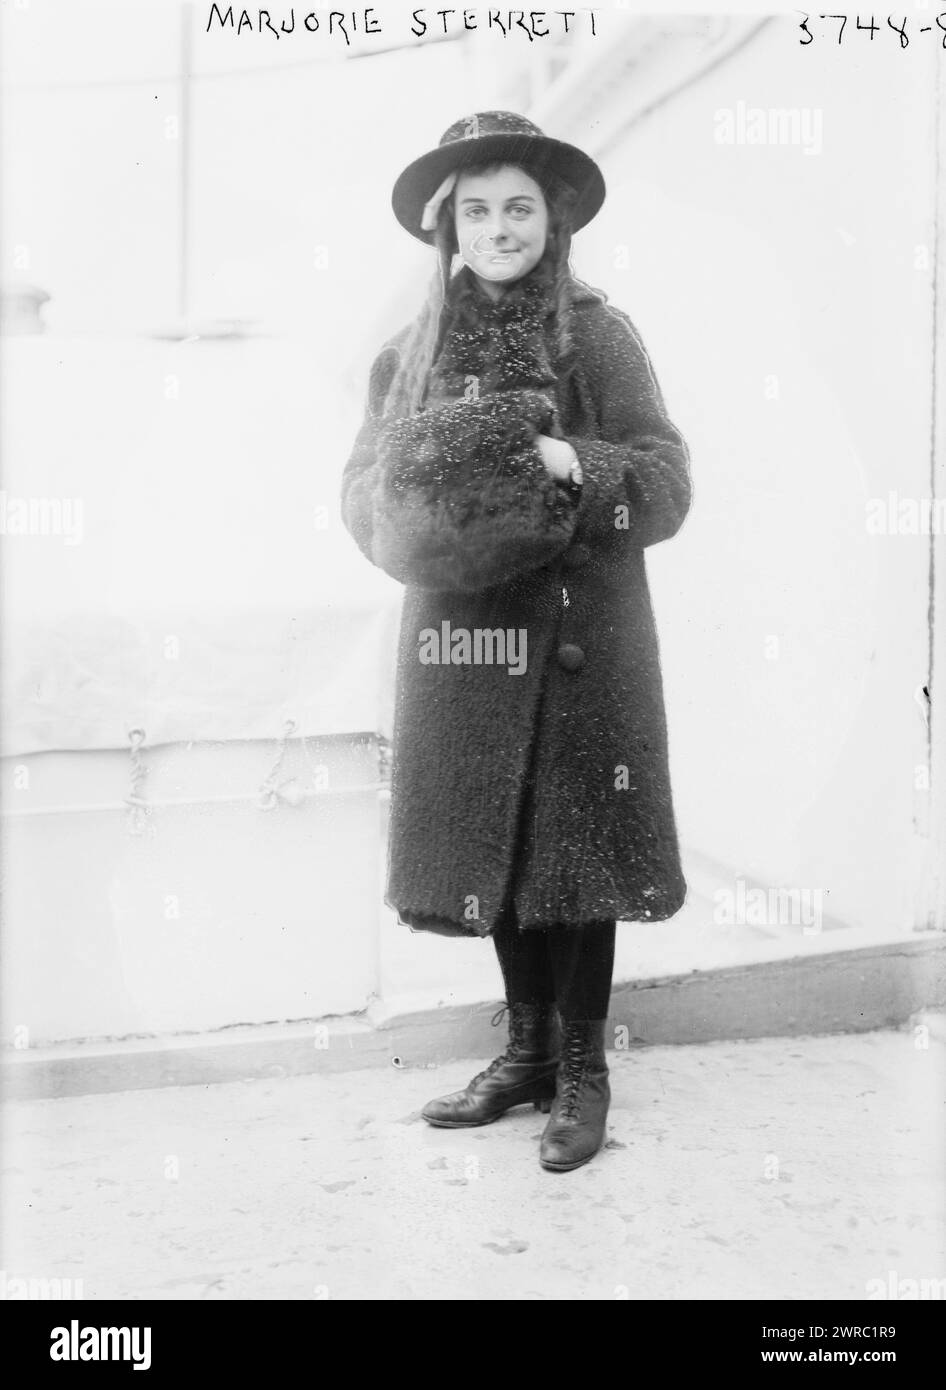 Marjorie Sterrett, Photograph shows Marjorie Sterrett who sent a dime to build a battleship. She was greeted by Theodore Roosevelt on the Steamship Guiana, February 11, 1916., between ca. 1915 and ca. 1920, Glass negatives, 1 negative: glass Stock Photo